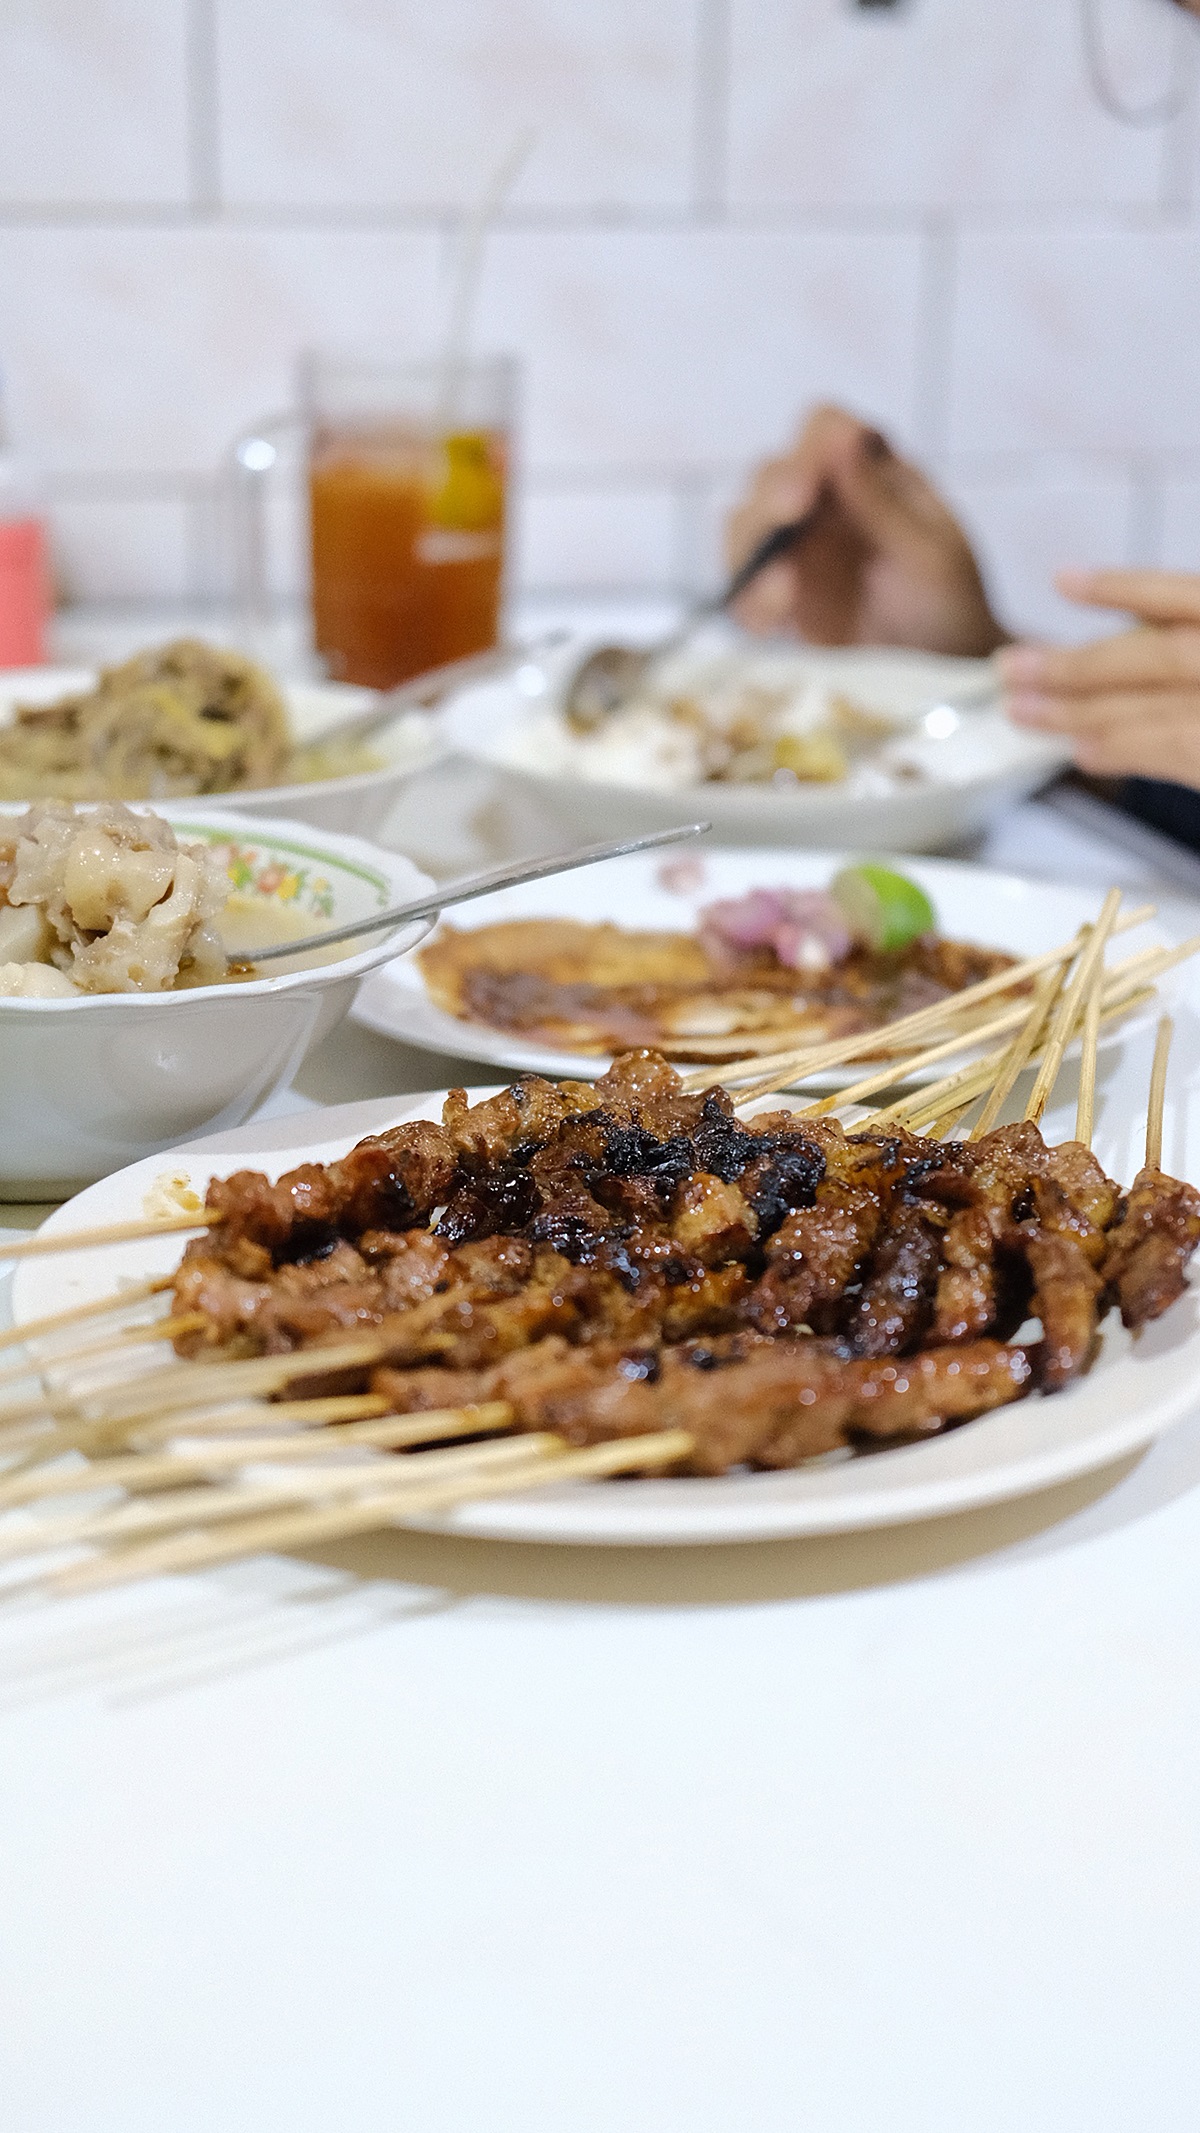 Dishes at an Indonesian restaurants, including satay skewers